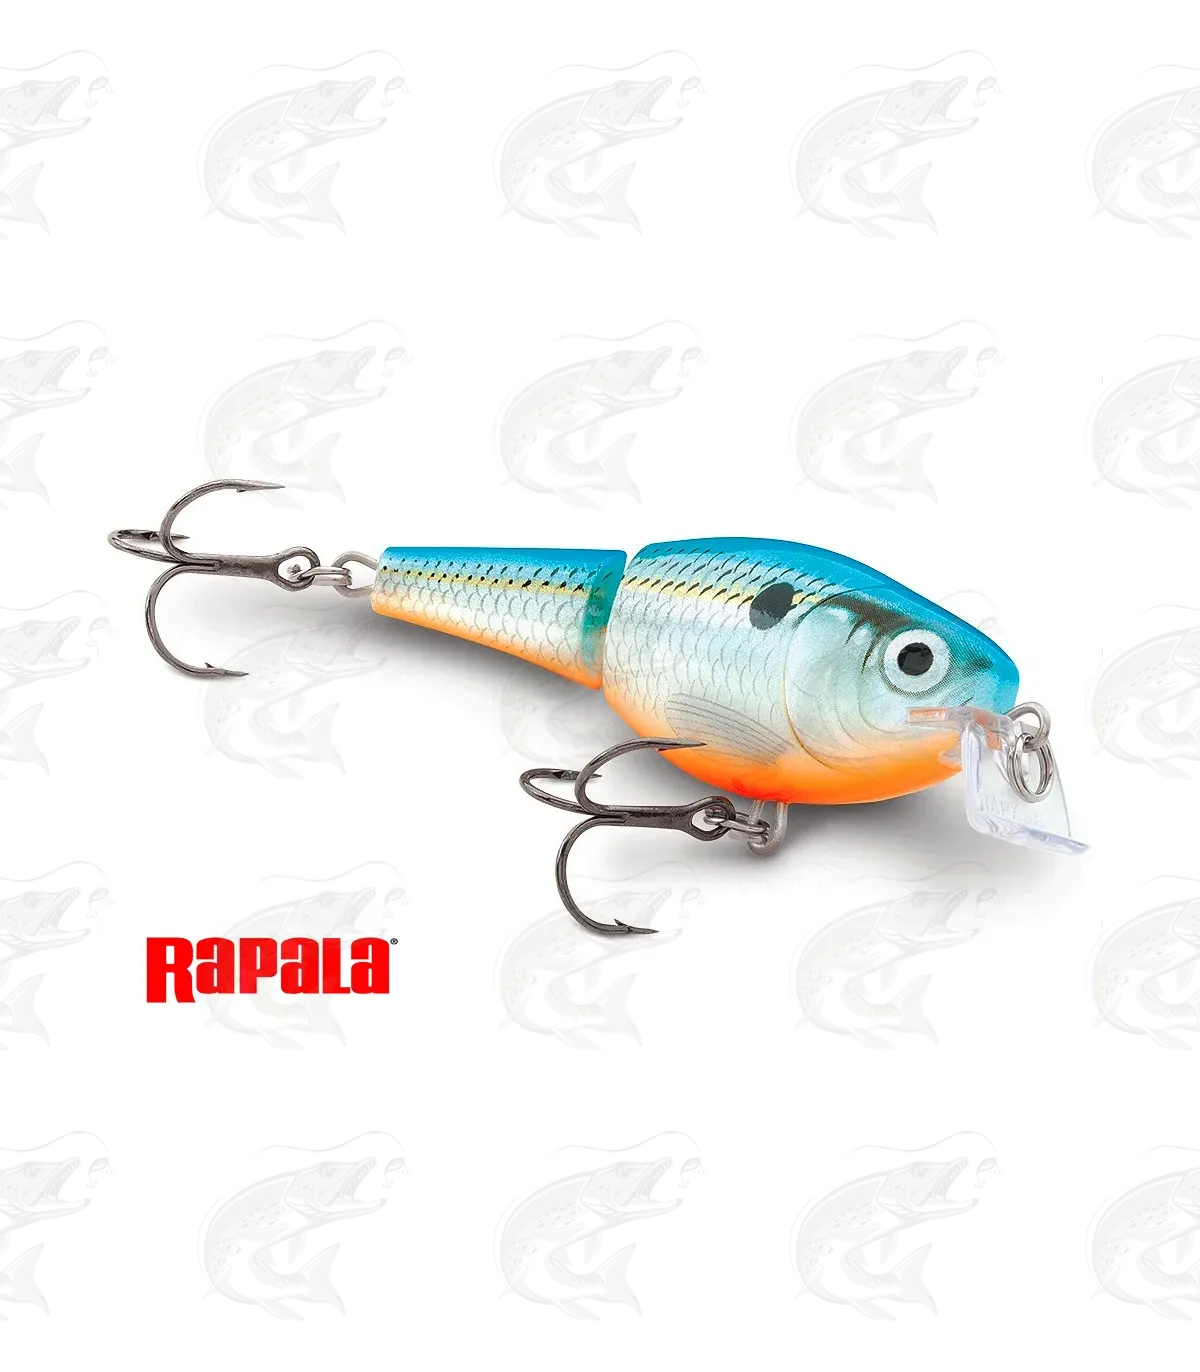 Rapala Jointed Shallow Shad Rap lures